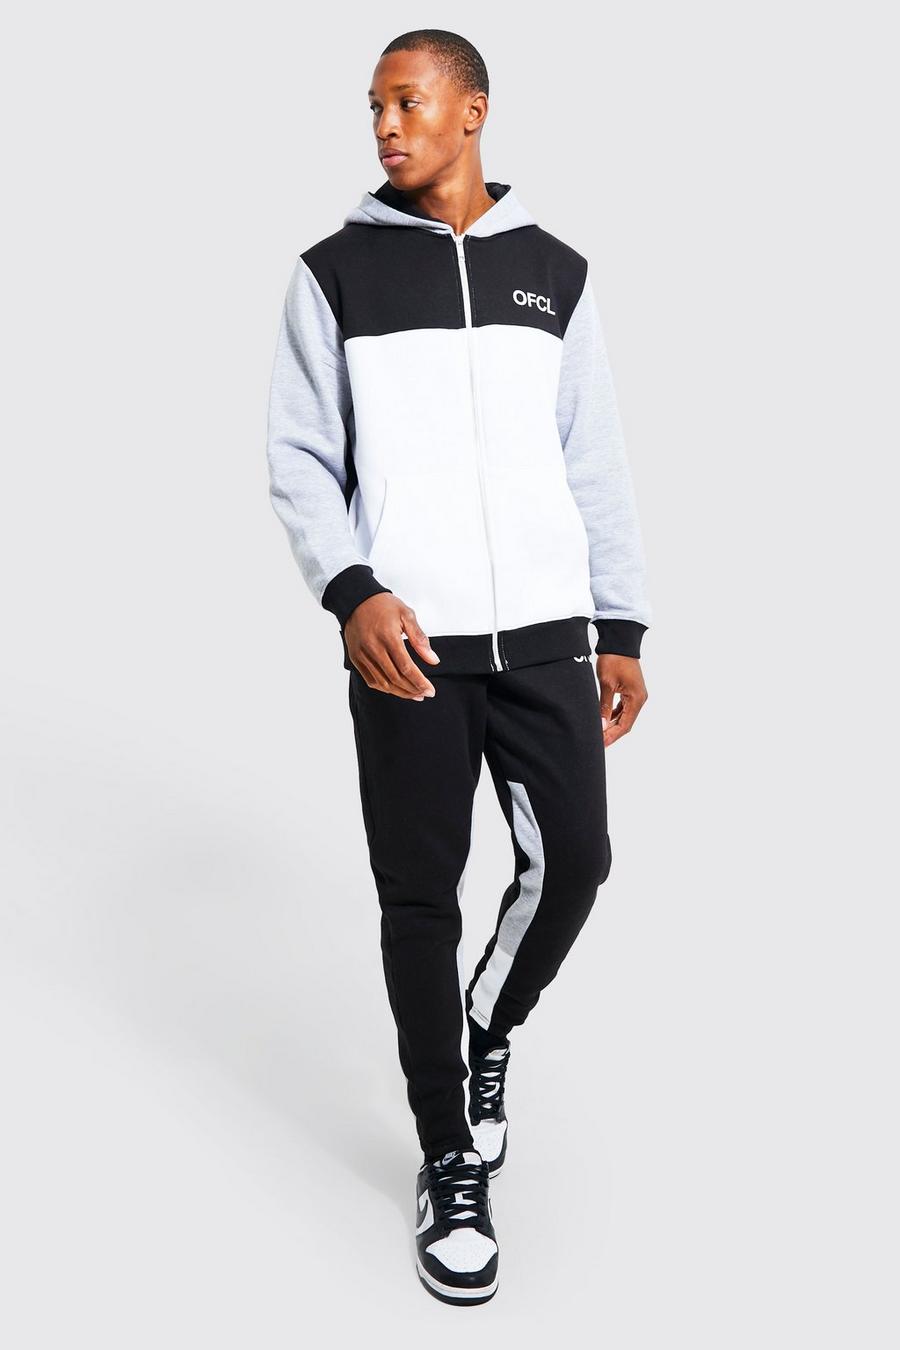 Grey marl gris Ofcl Colour Block Zip Hooded Tracksuit